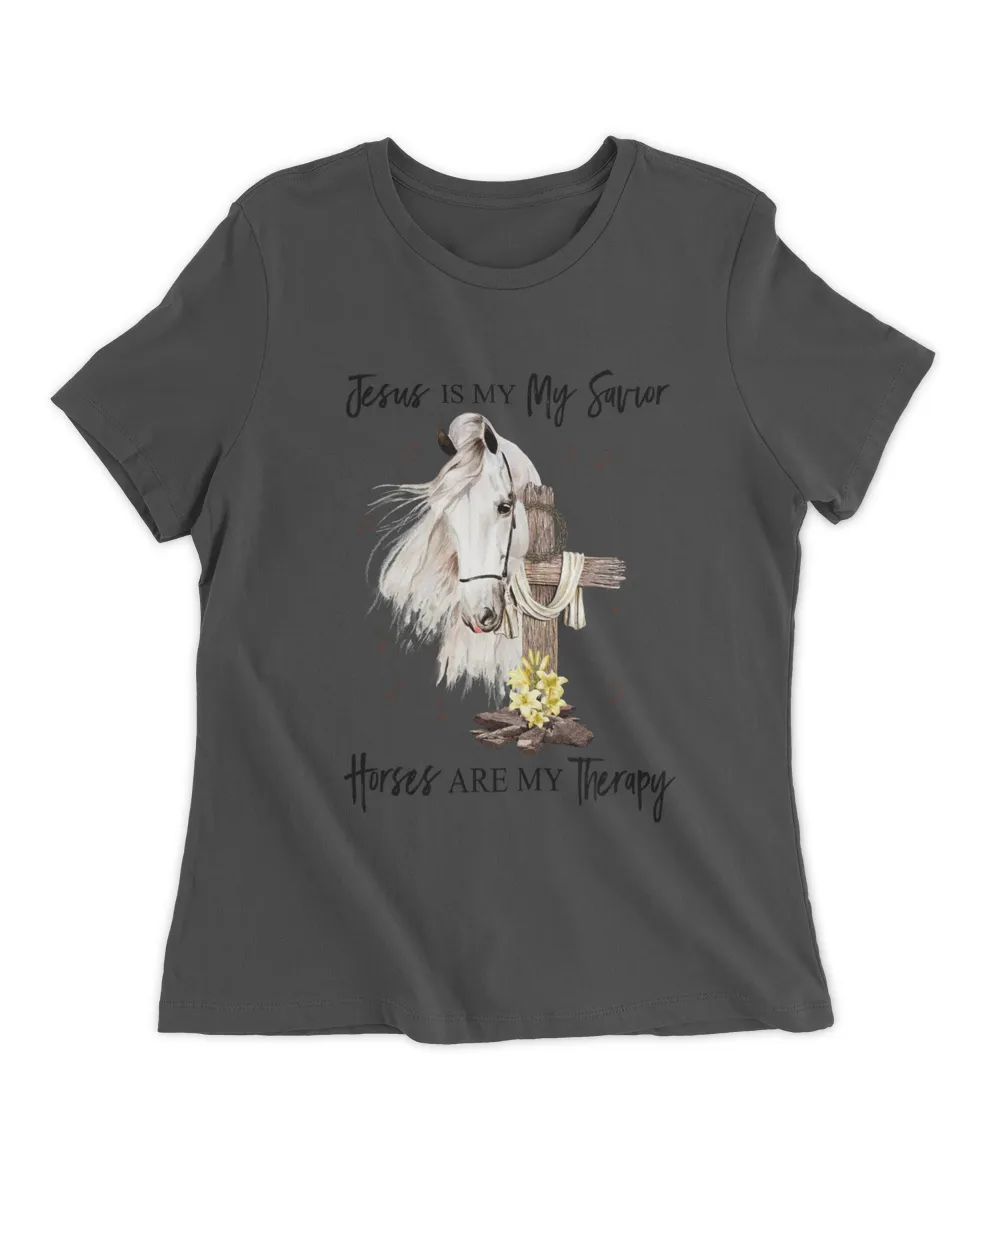 Jesus is my savior, Horses are my therapy